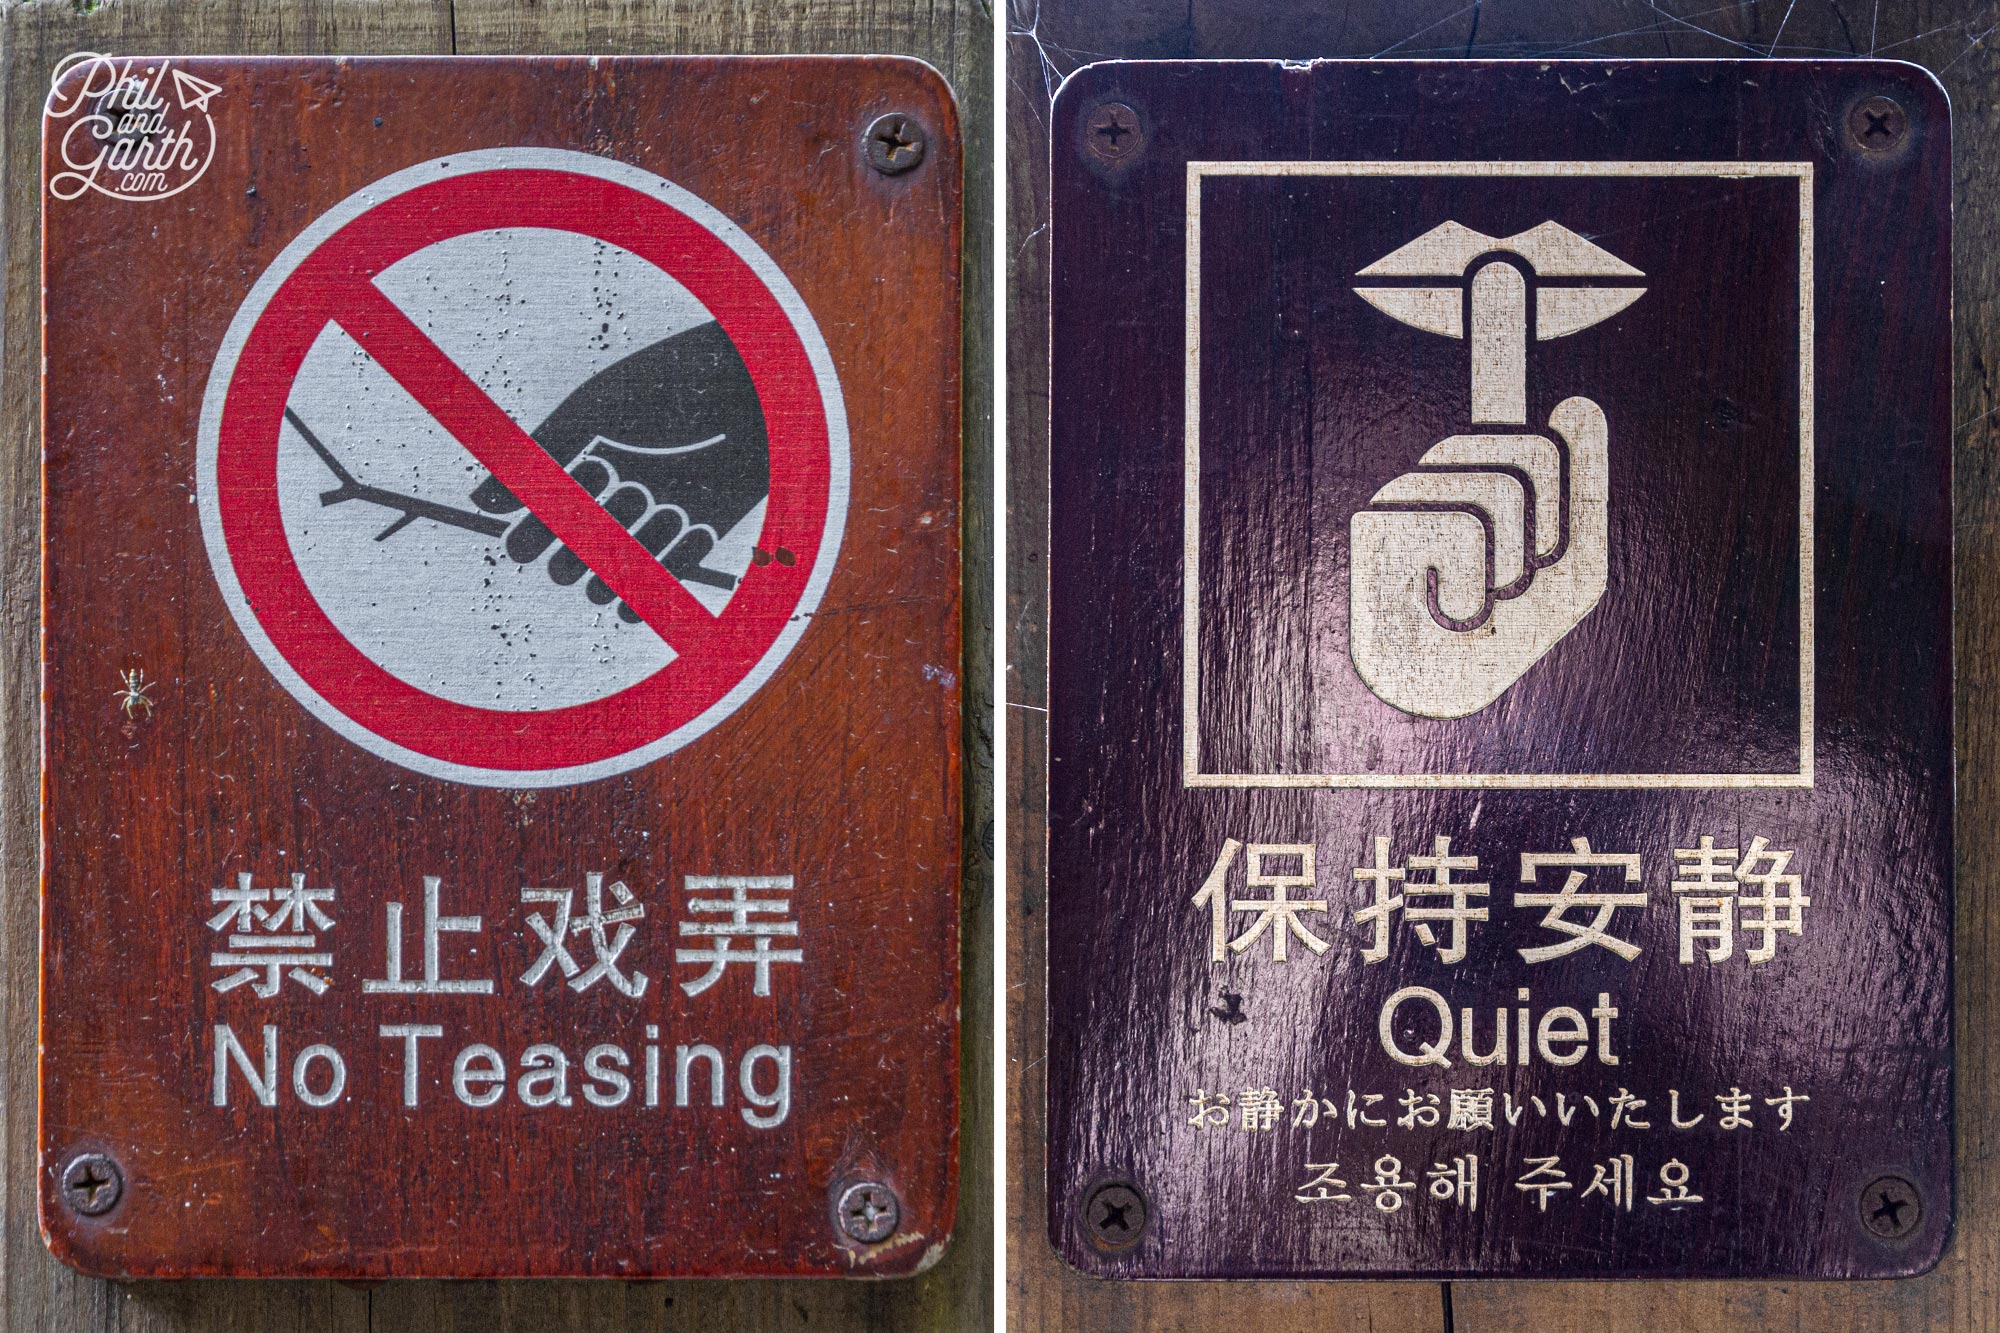 No teasing the pandas and be quiet when close